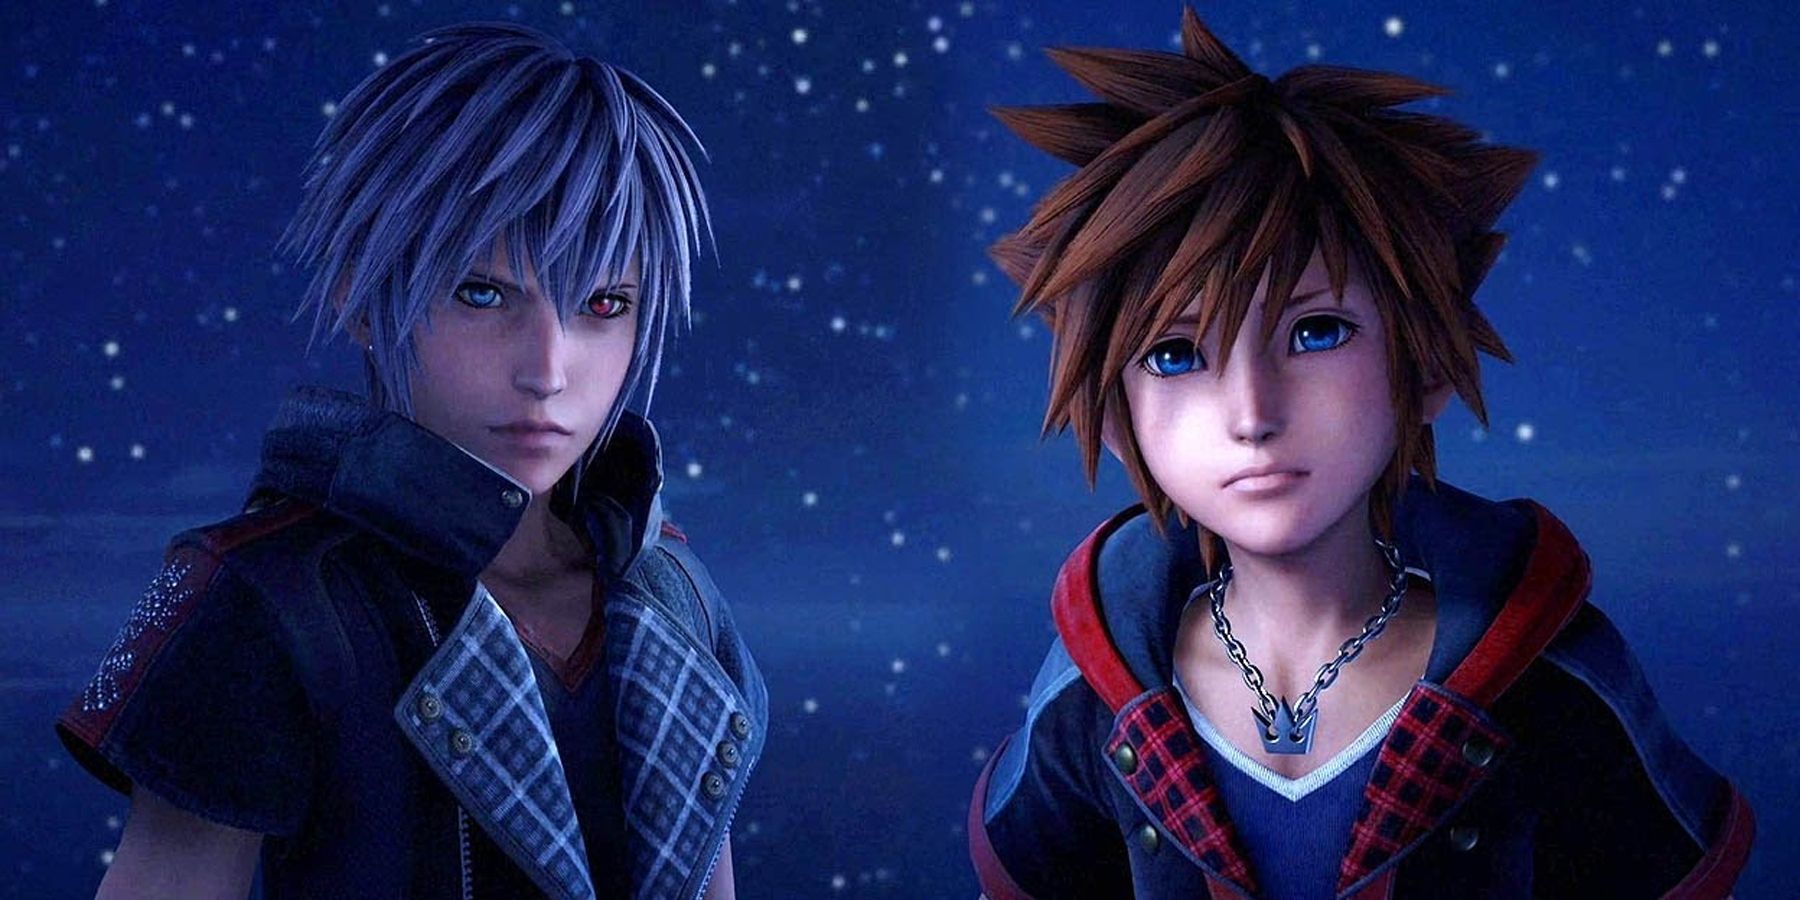 Sora and Yozora from Kingdom Hearts 3 stand in front of a starry night sky.